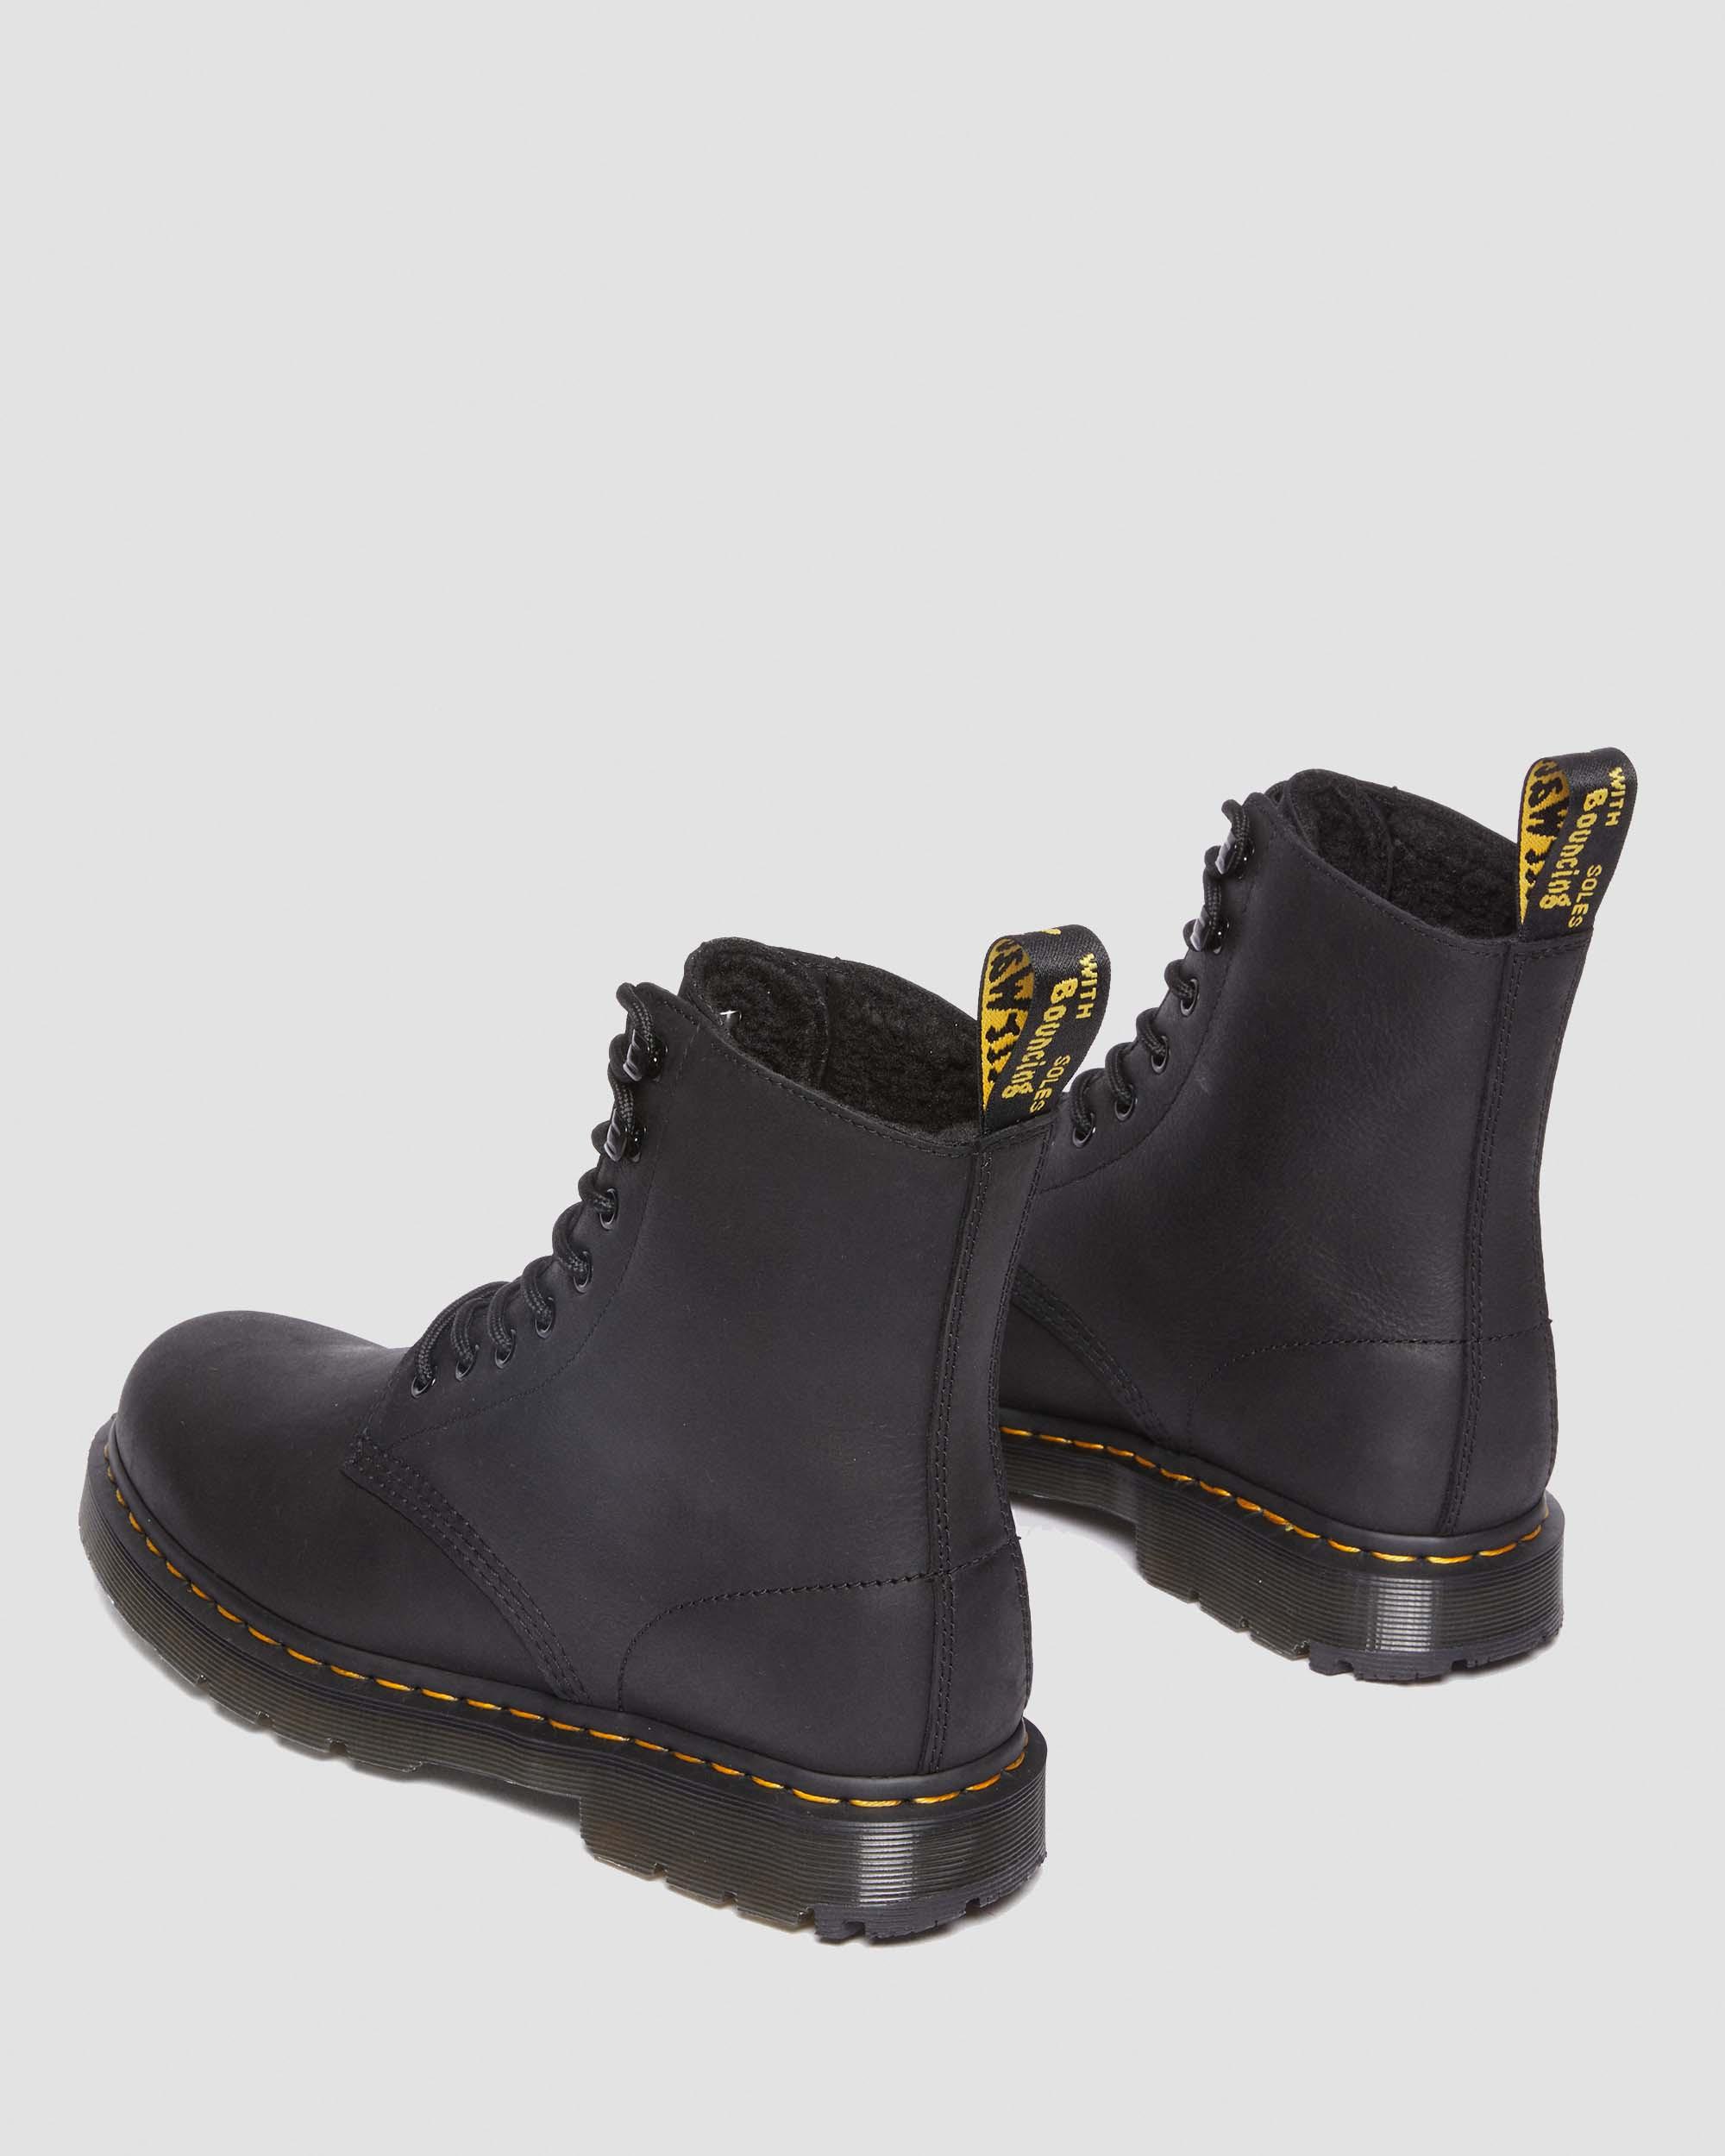 1460 Pascal Fleece Lined Leather Boots in BLACK